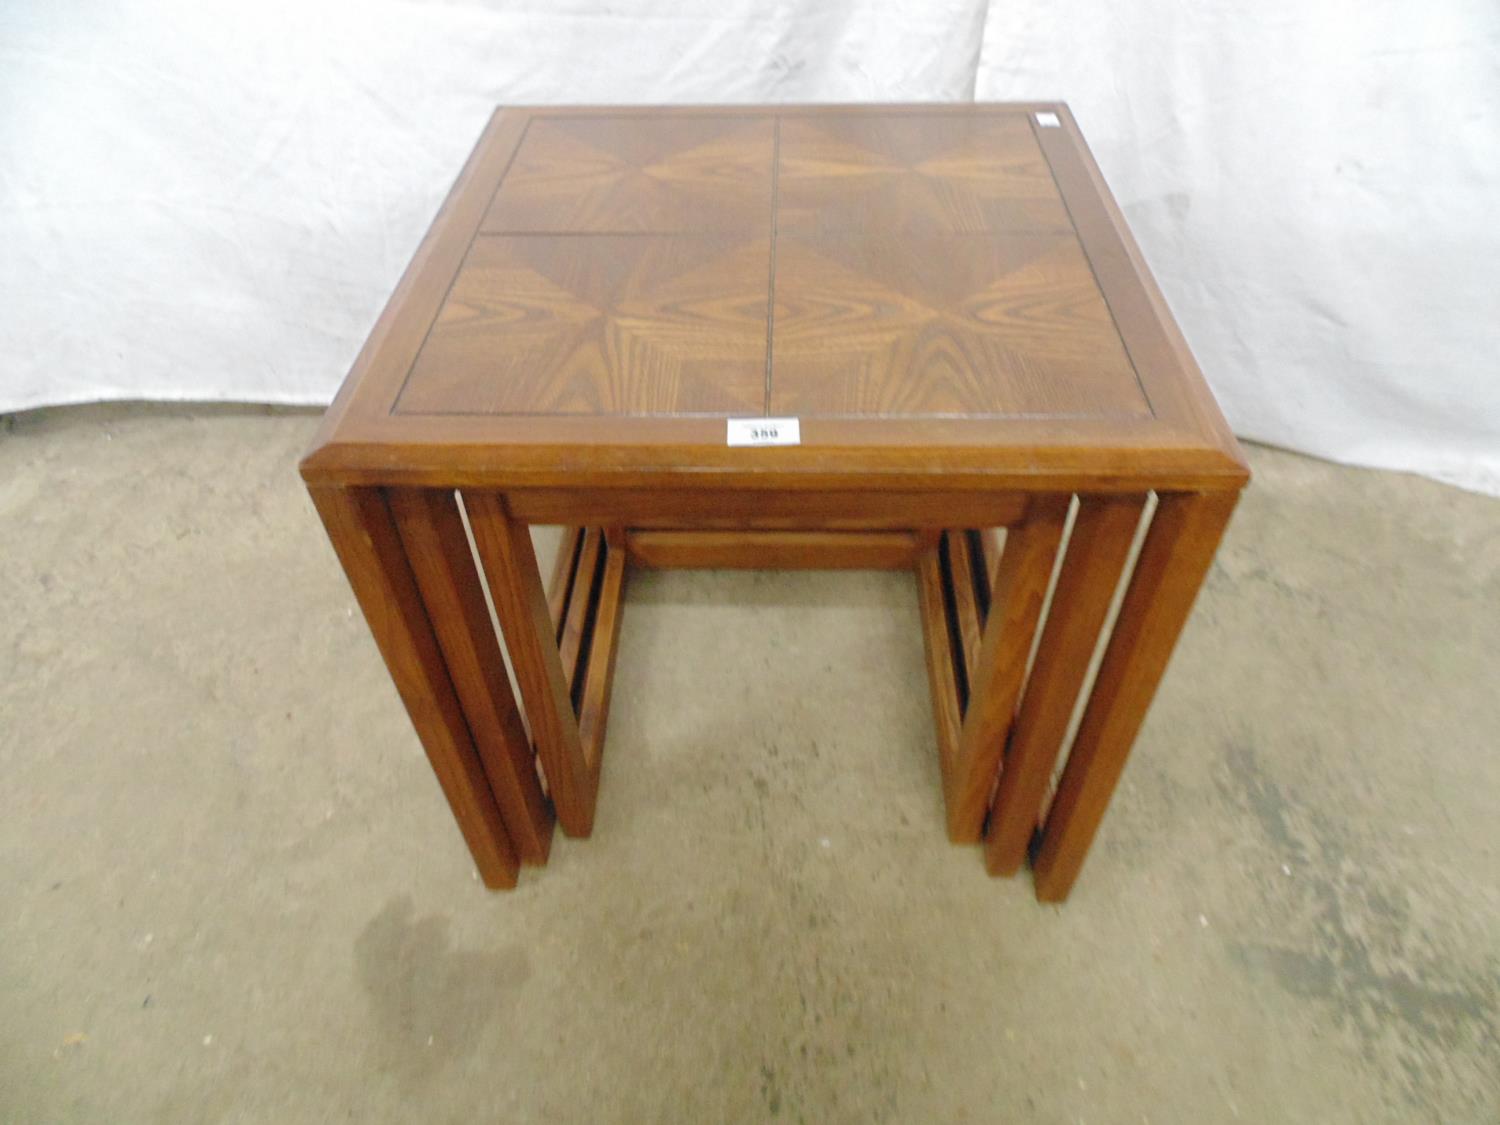 Nest of G-Plan tables having quartered parquetry style top - largest 51cm x 51cm x 50cm tall